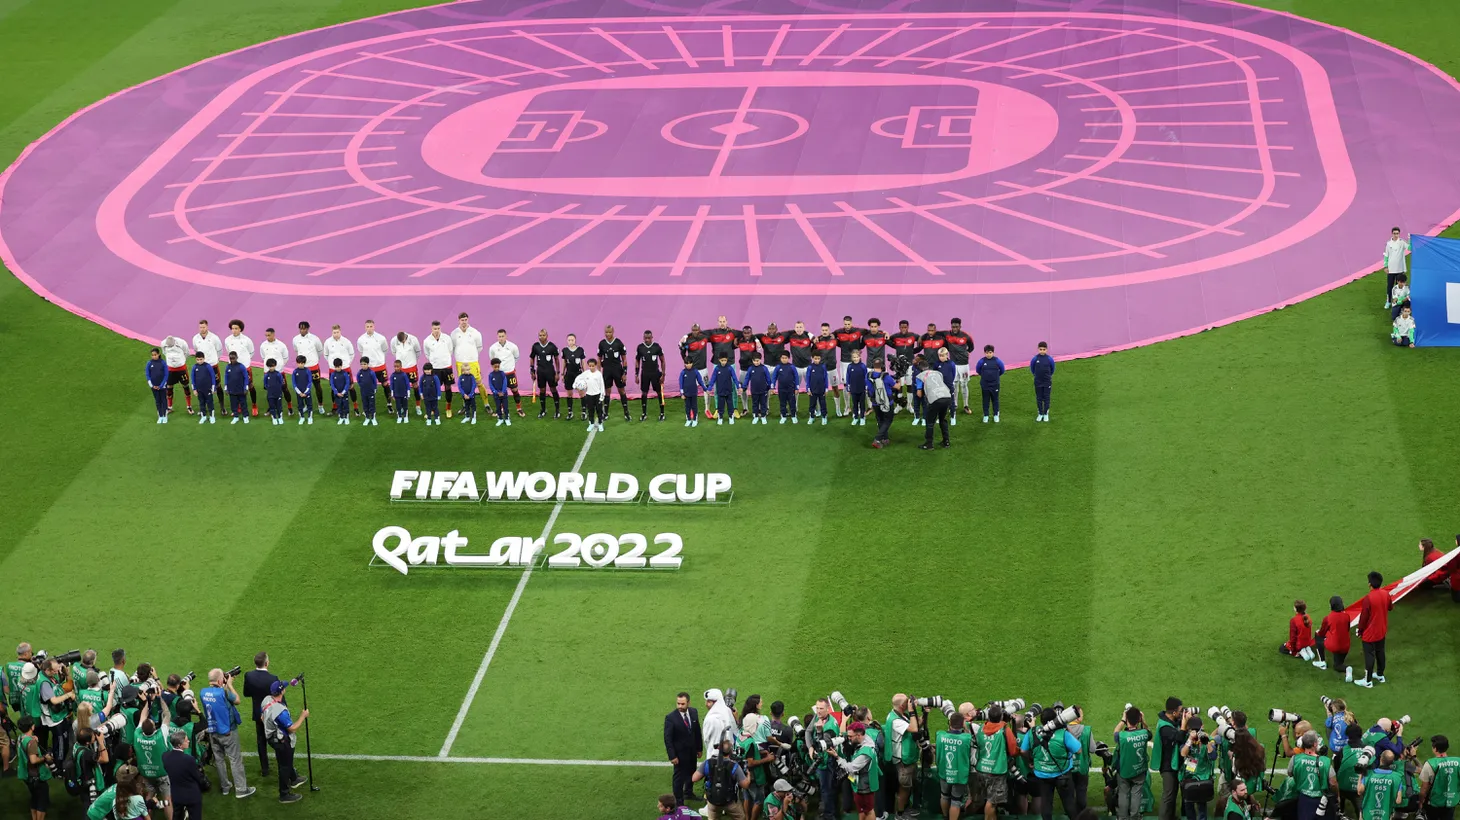 Belgium and Canada teams line up before their match at Ahmad Bin Ali Stadium in Qatar, November 23, 2022. “The Qatari regime is controlling this tournament and showing it in moments like two days before the tournament saying, ‘Oh, actually, after 12 years of preparations, we're not going to allow beer in the stadiums.’ It's less about the beer, in my opinion, than it is about the Qataris showing they can move the goalposts; that they can control a number of things, and that no matter what FIFA says, that's not something that FIFA can guarantee,” says Grant Wahl, U.S. soccer writer for CBS sports.